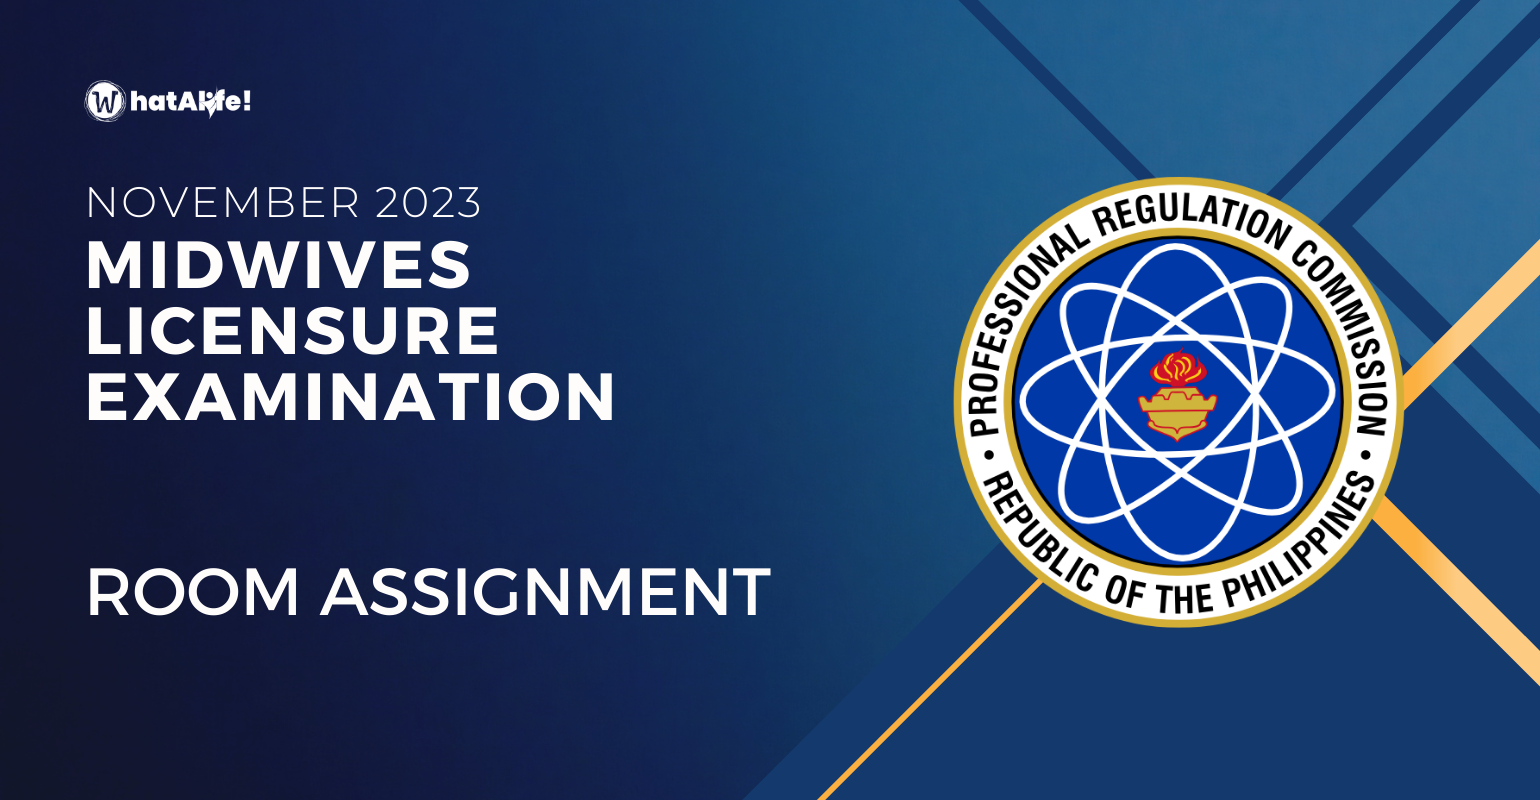 Room Assignment — November 2023 Midwives Licensure Exam